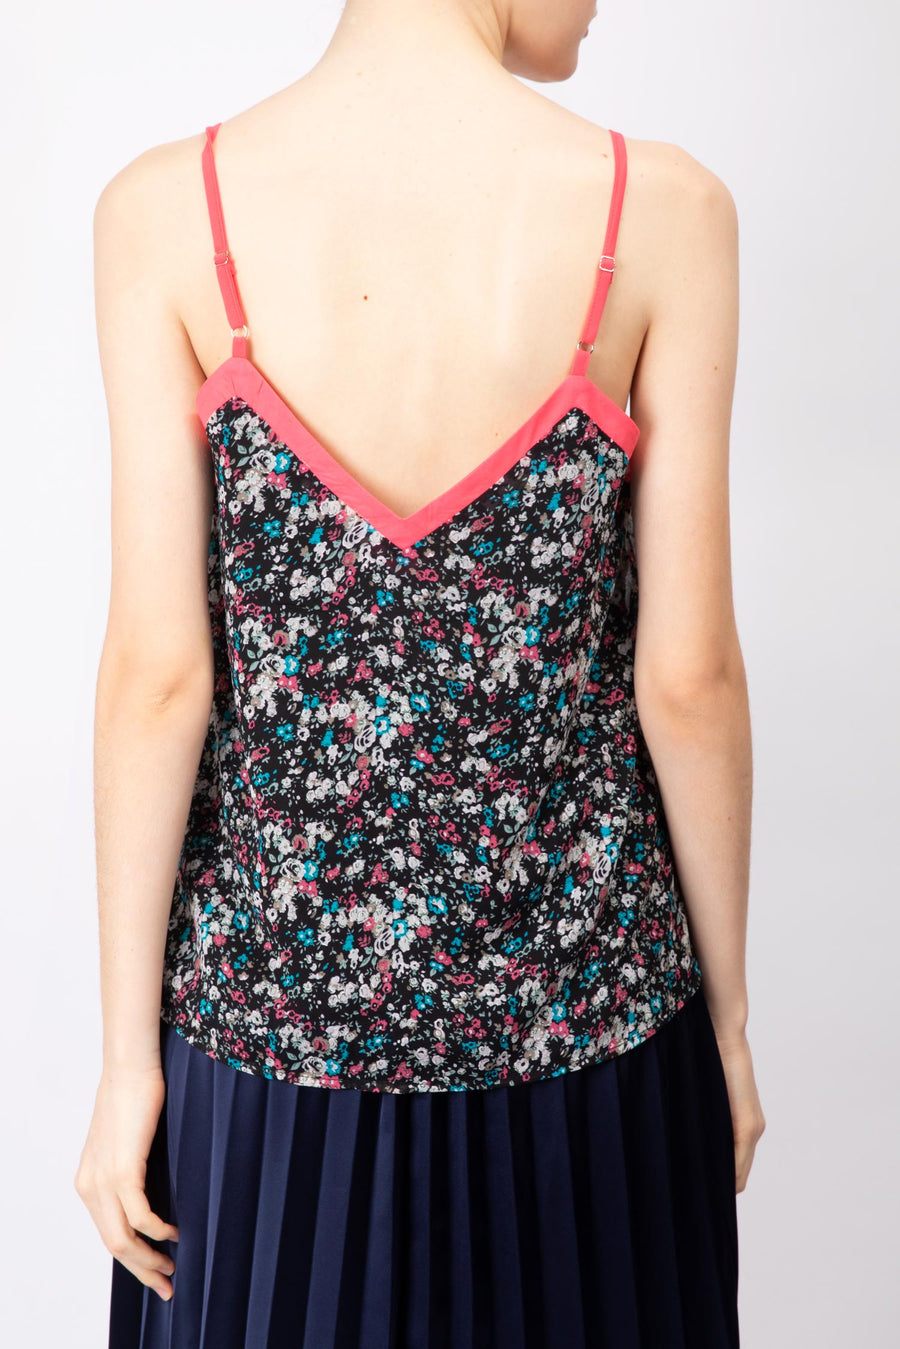 Floral Printed Camisole Top